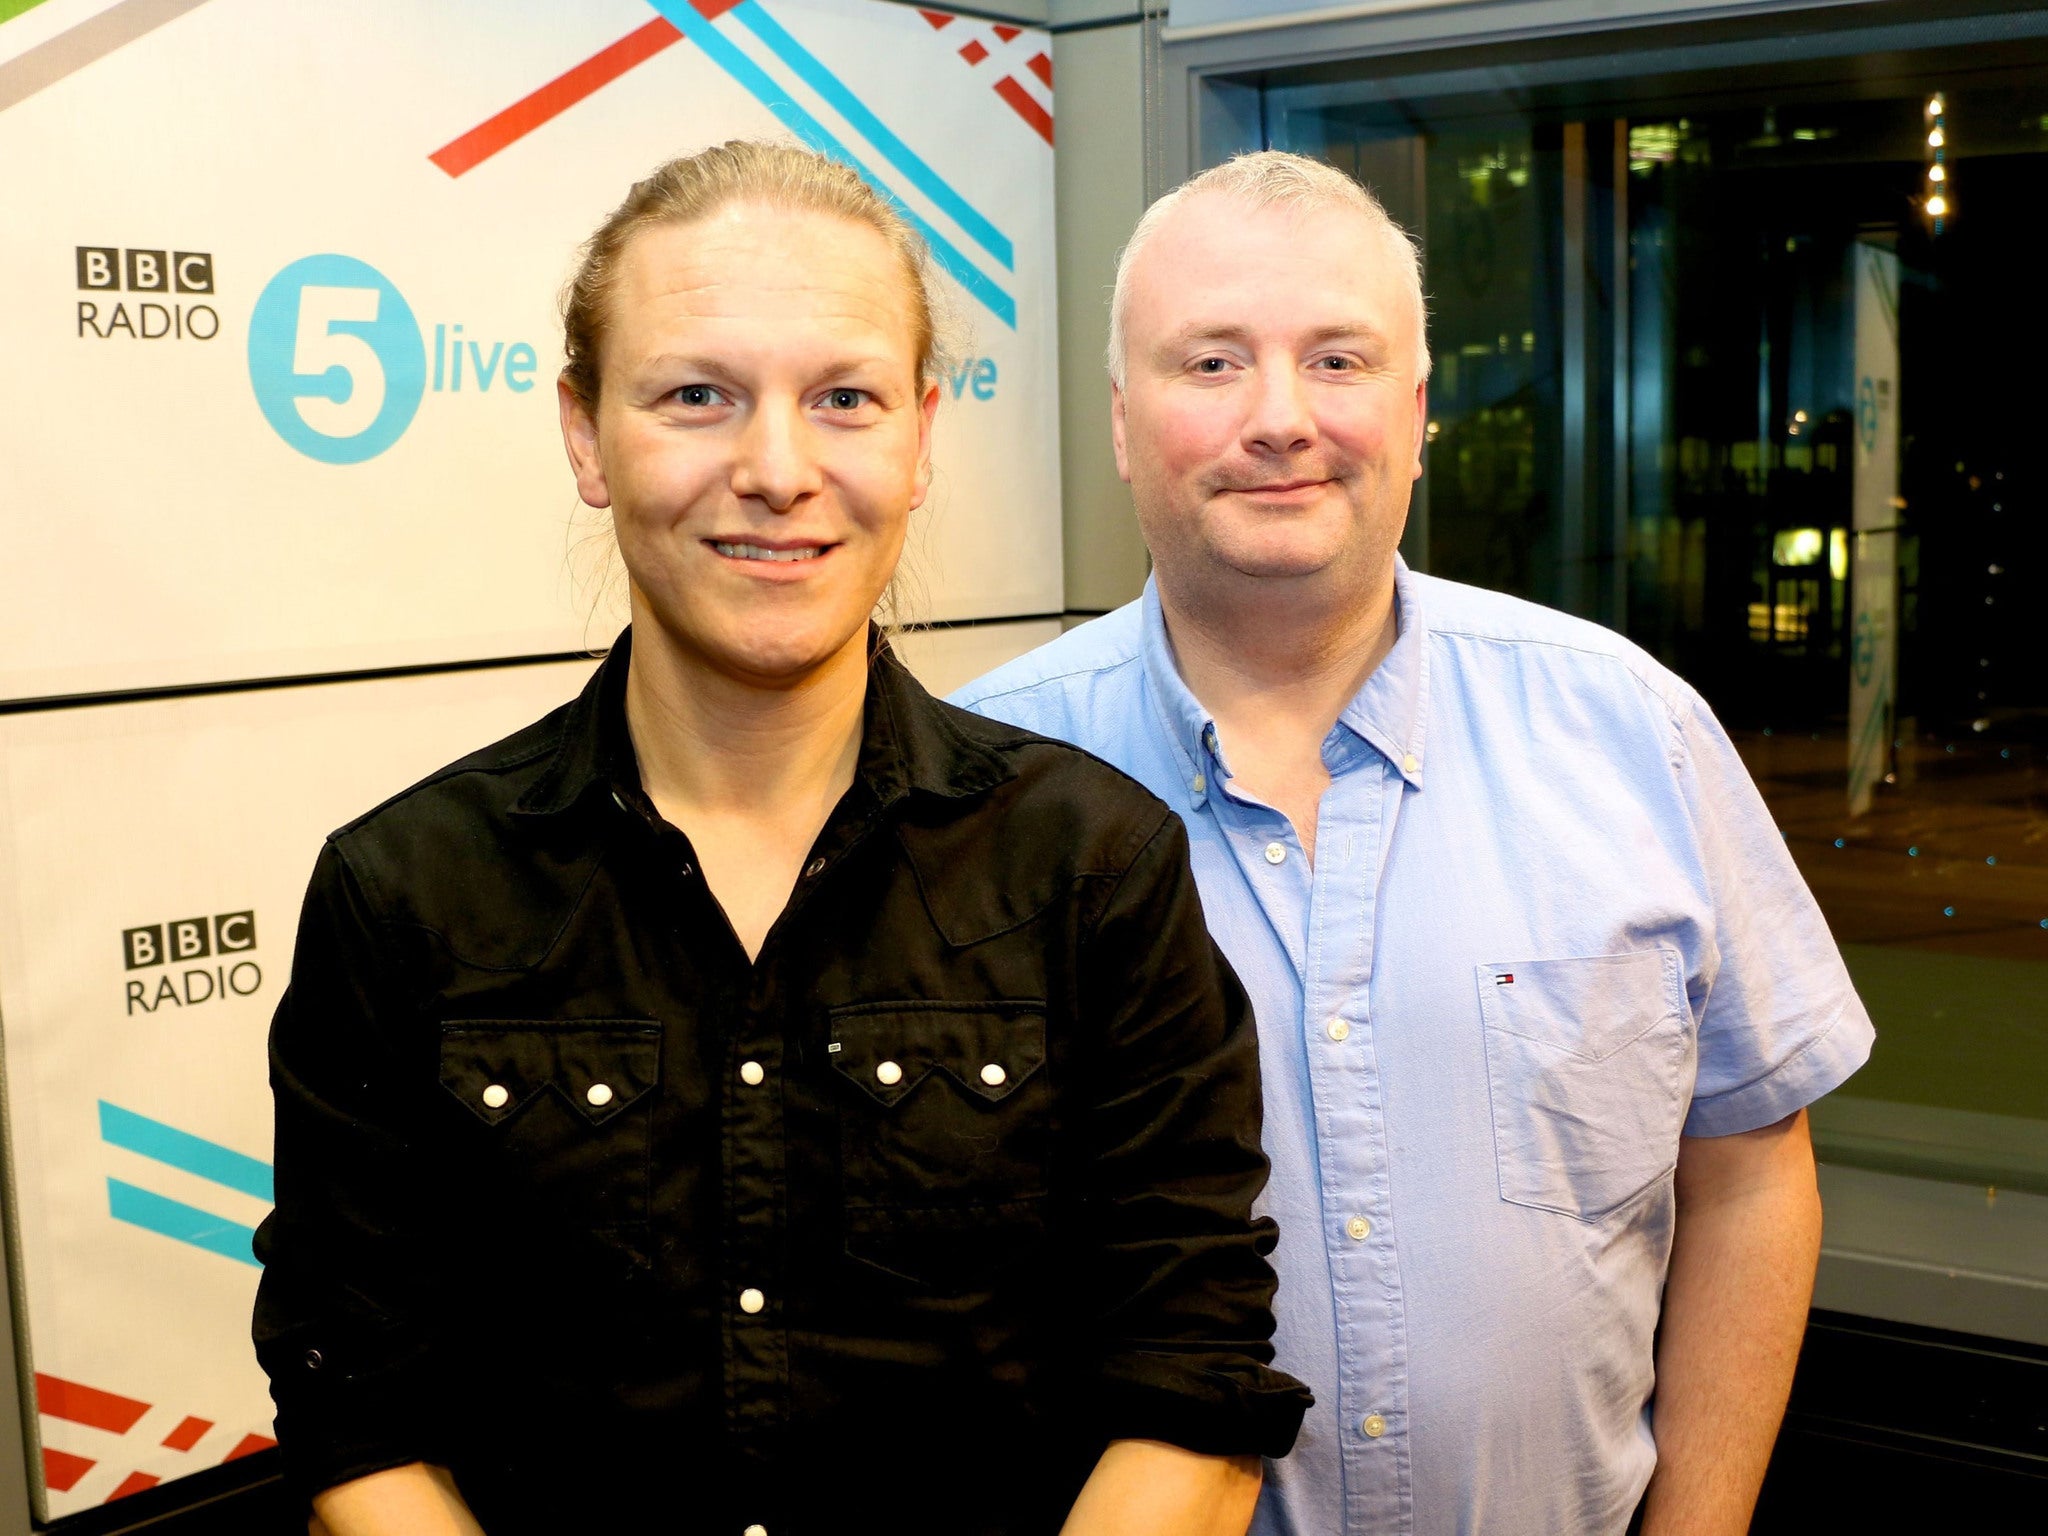 Simon Hirst has changed her name to Stephanie and will live as a woman. Pictured here on the left next to BBC Radio 5 Live presenter Stephen Nolan